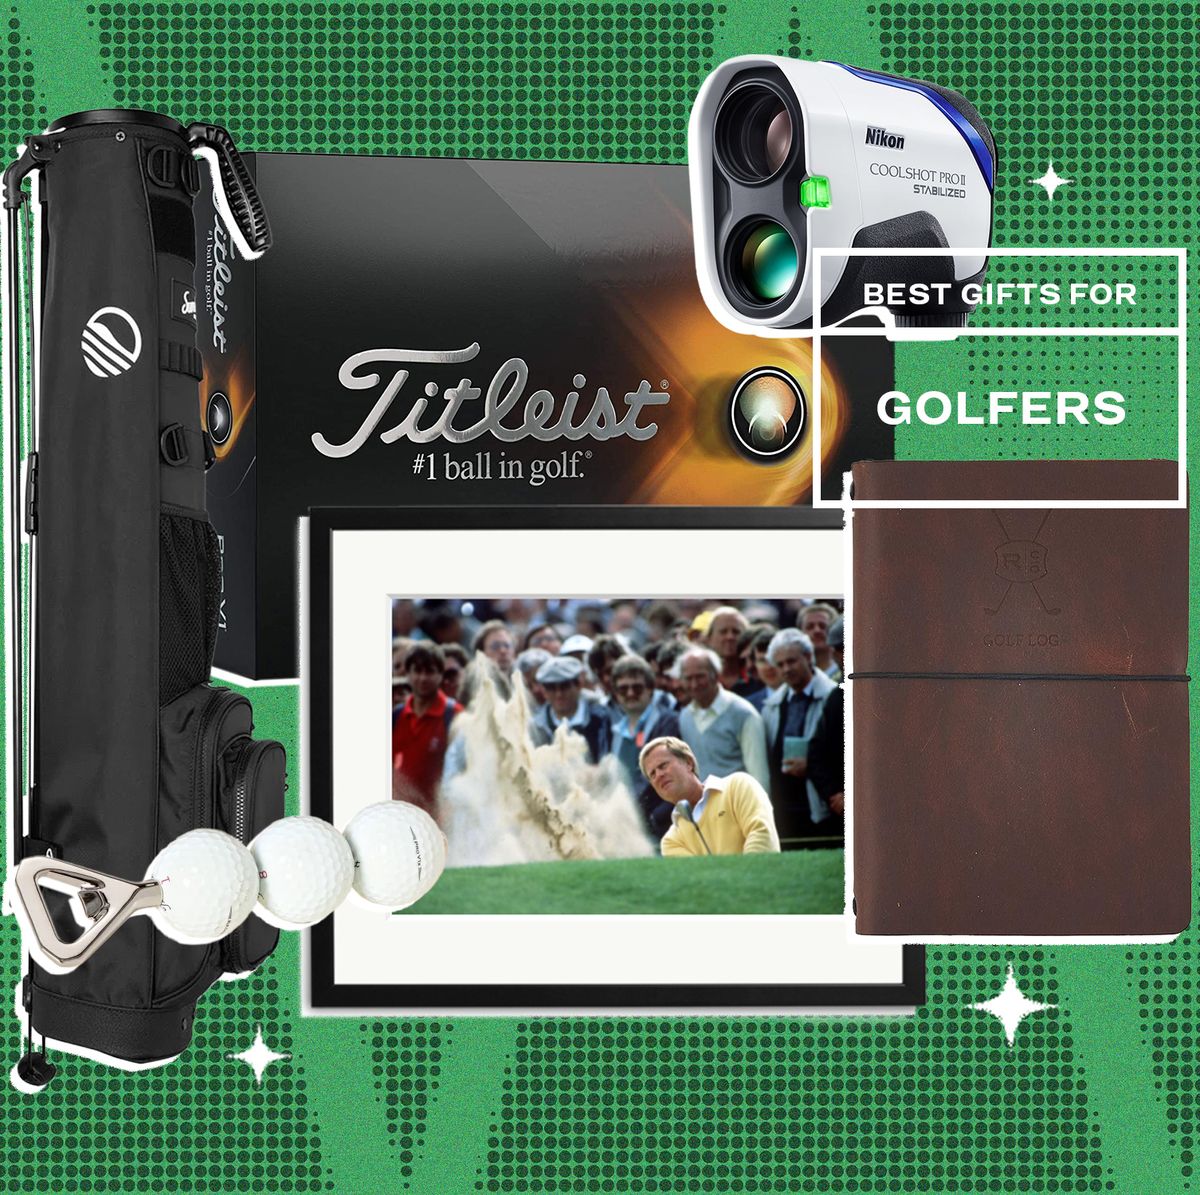 72 Golf Gifts That Are Sure to Be a Hole-In-One  Golf gifts, Funny golf  gifts, Golf gifts for men